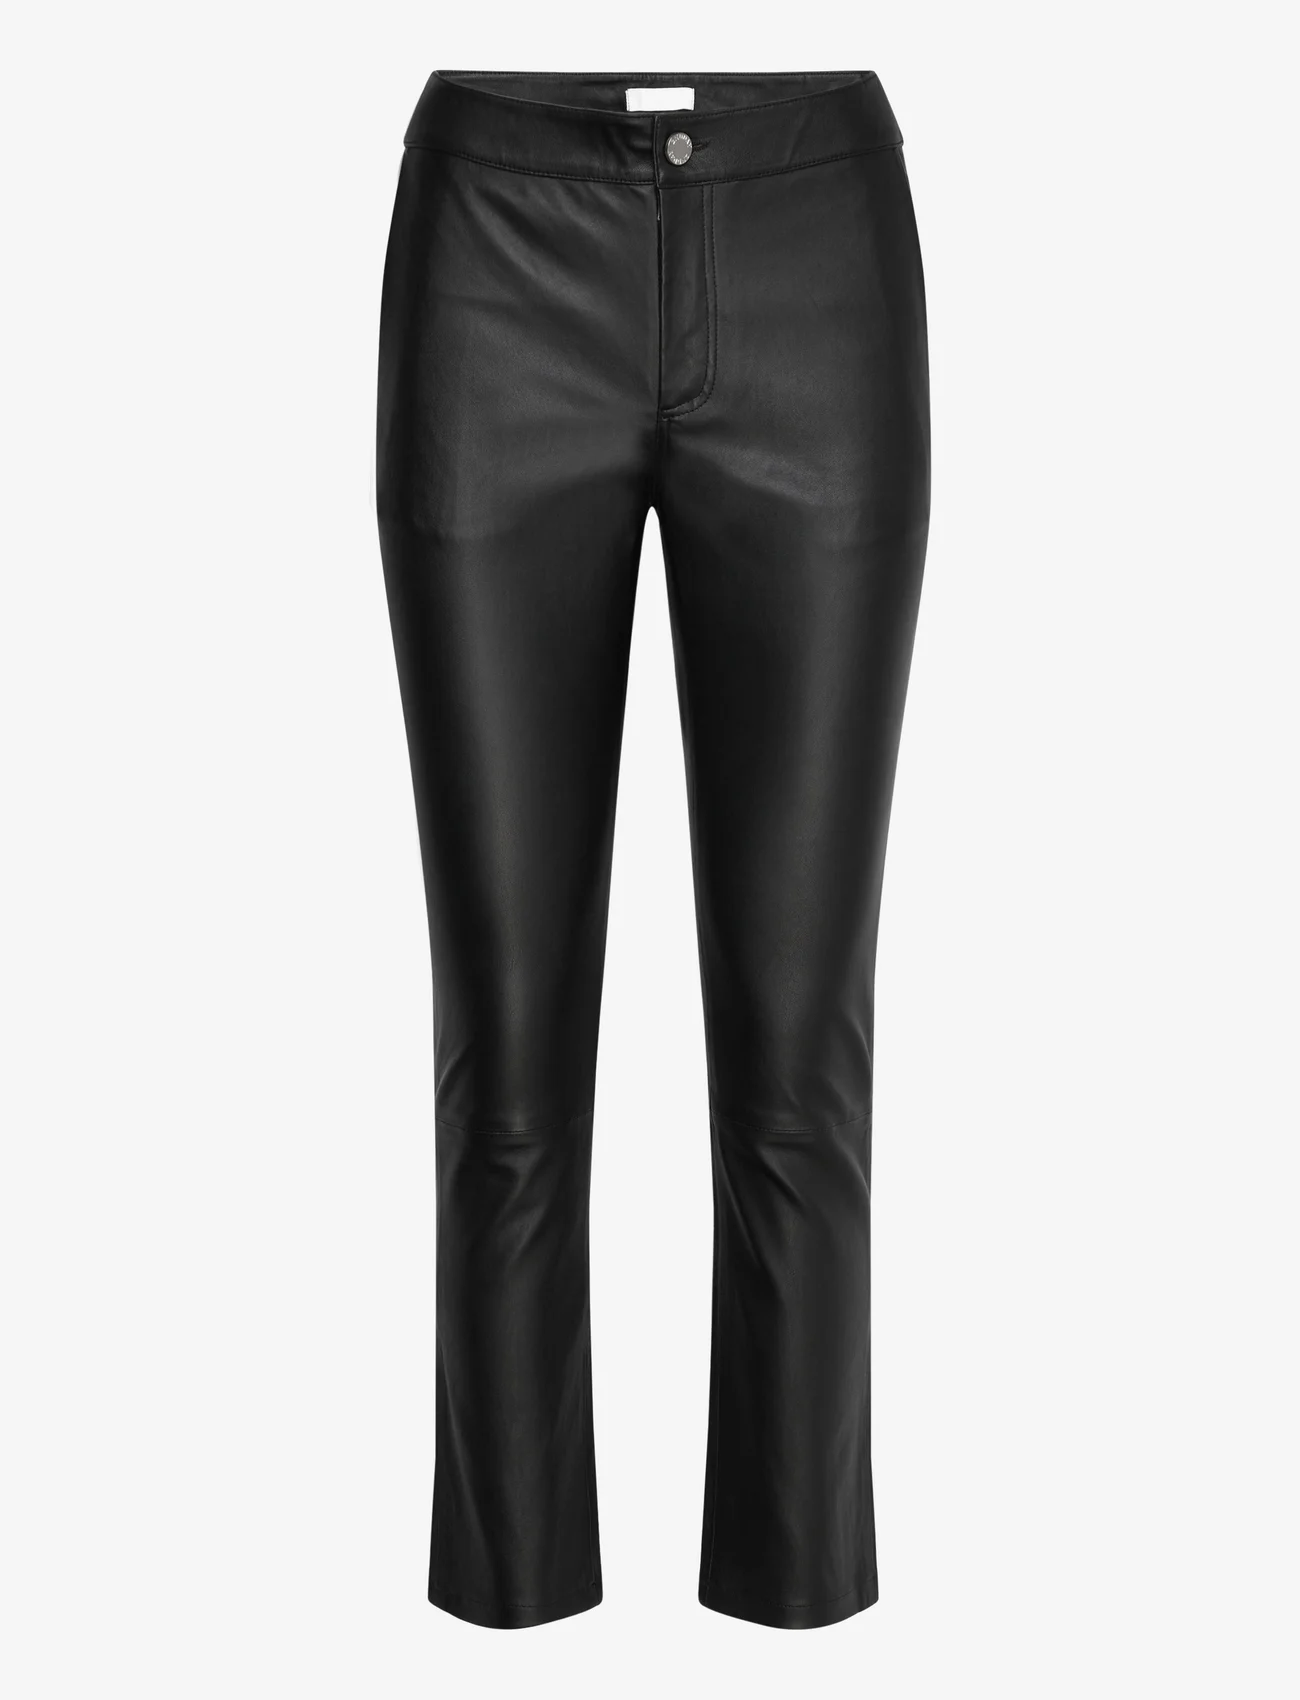 2NDDAY - 2ND Leya - Refined Stretch Leather - leather trousers - meteorite (black) - 0